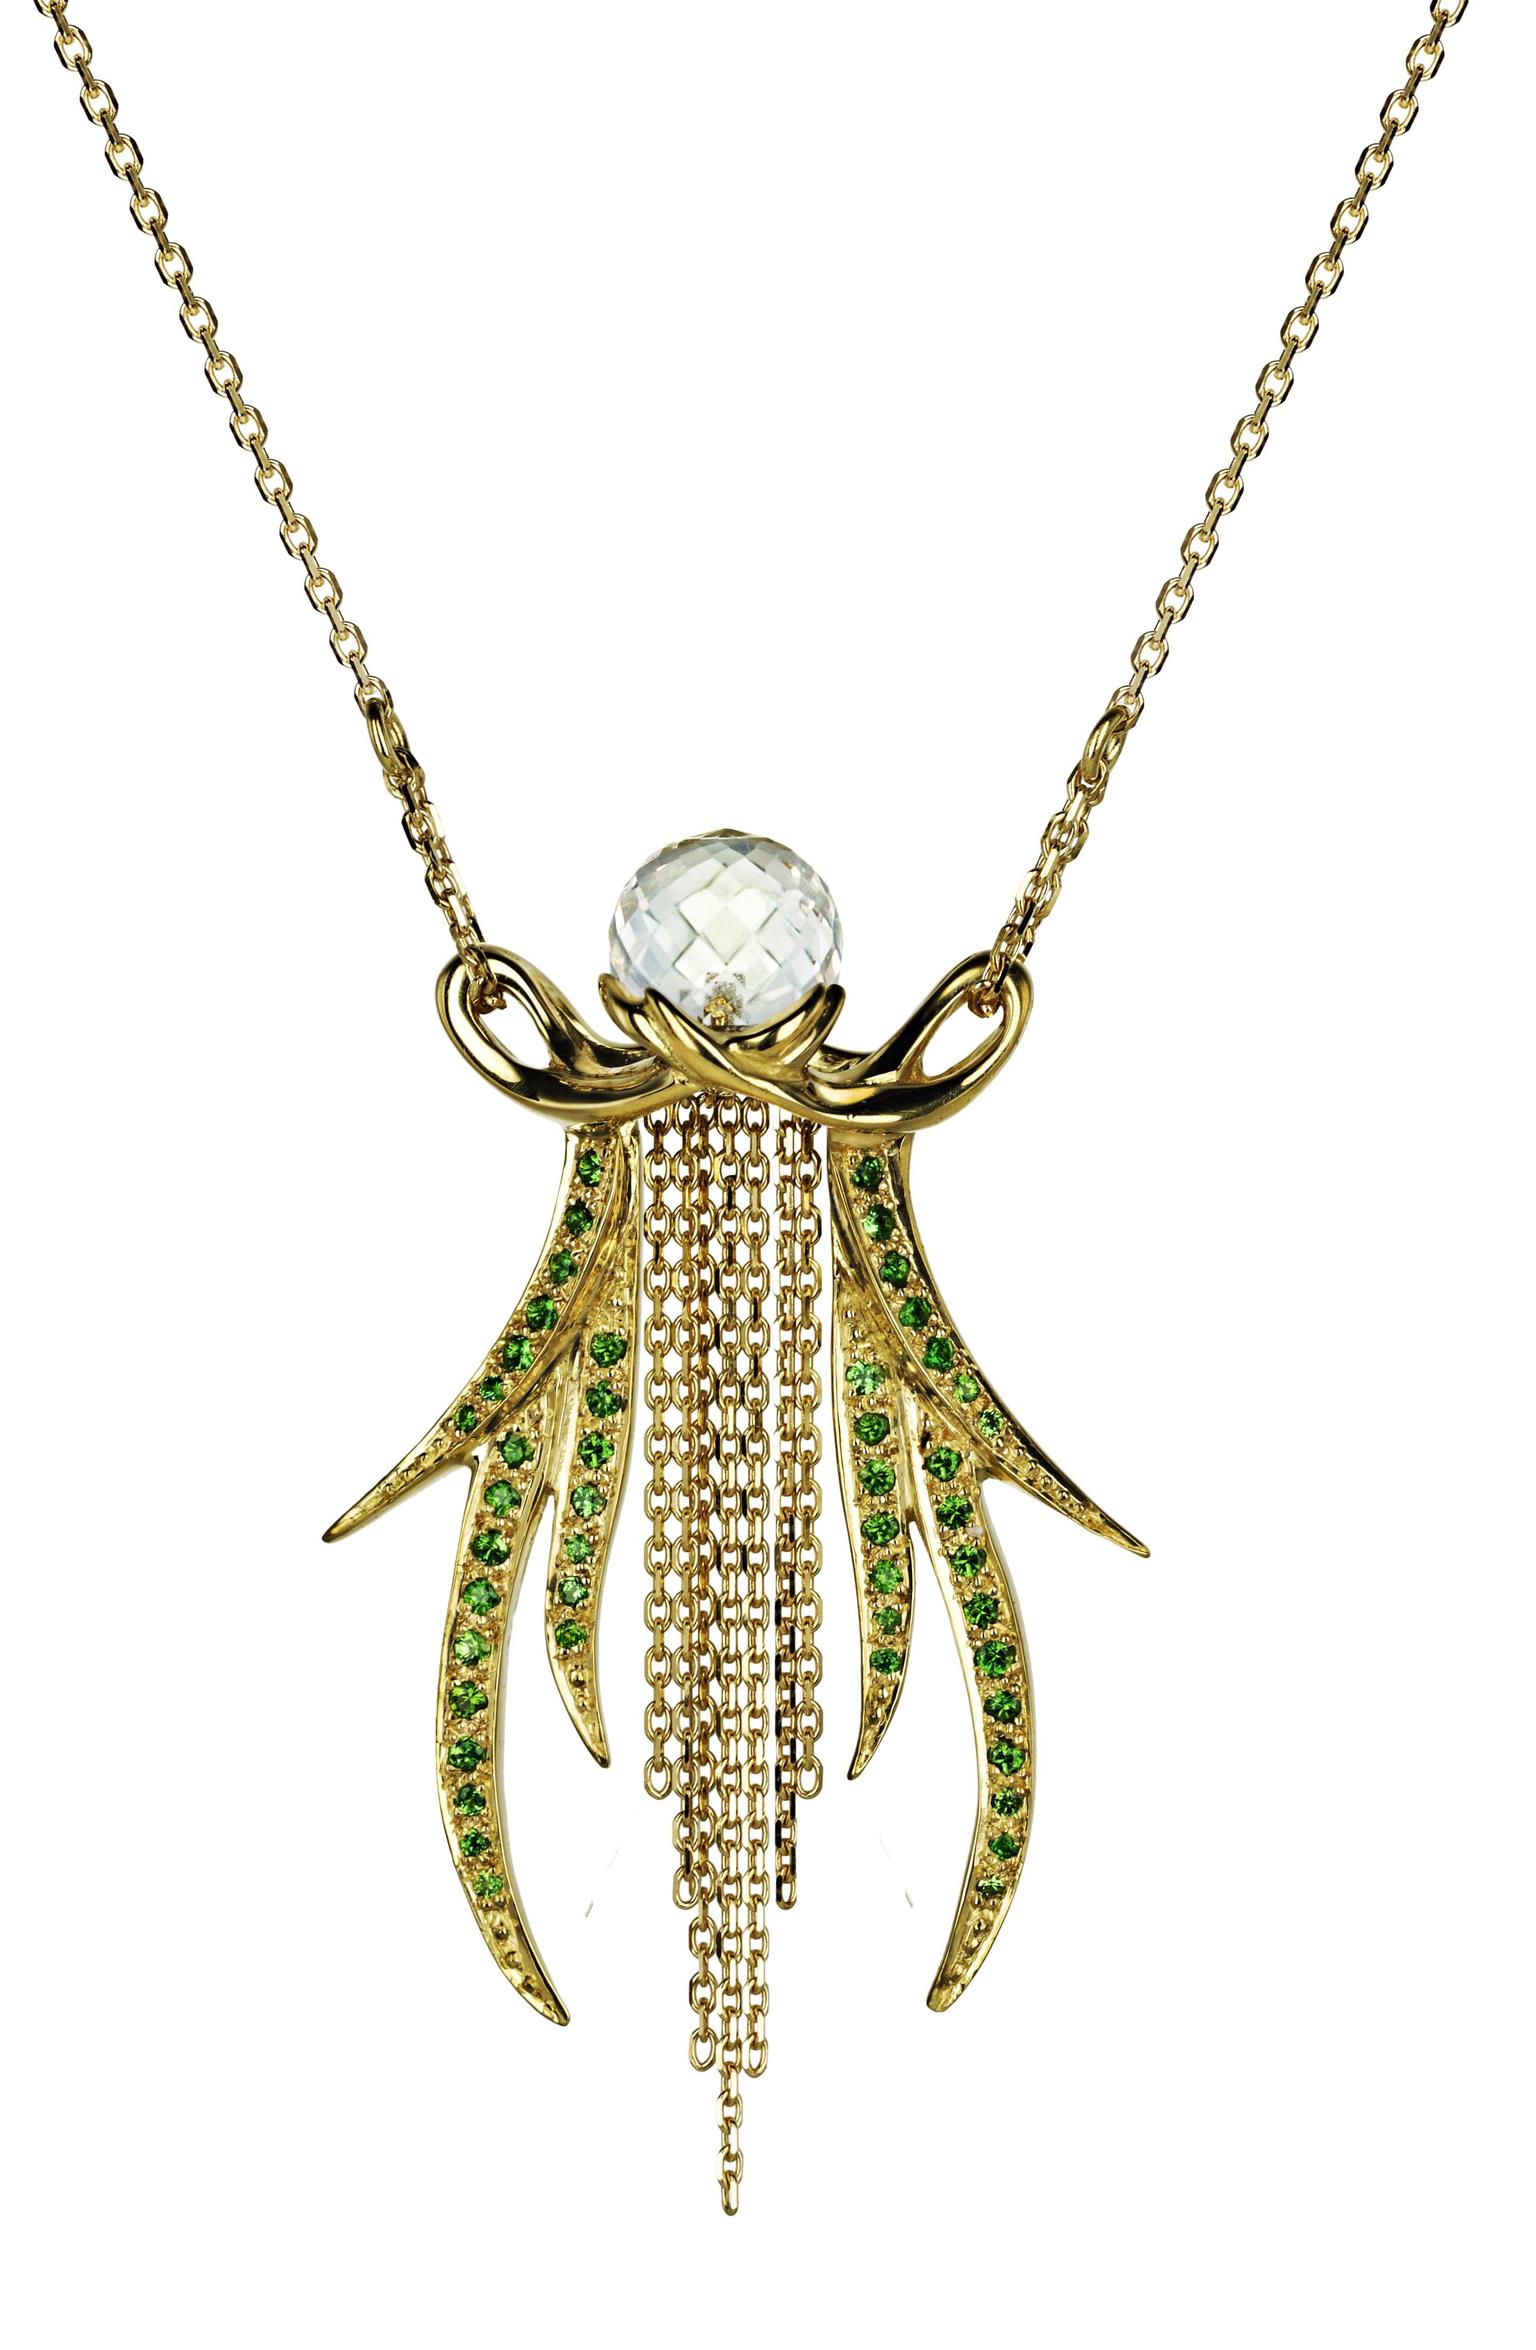 Ana de Costa necklace in yellow gold from the Alchemy collection, topped with white rock crstyal and pavé set with tsavorites.